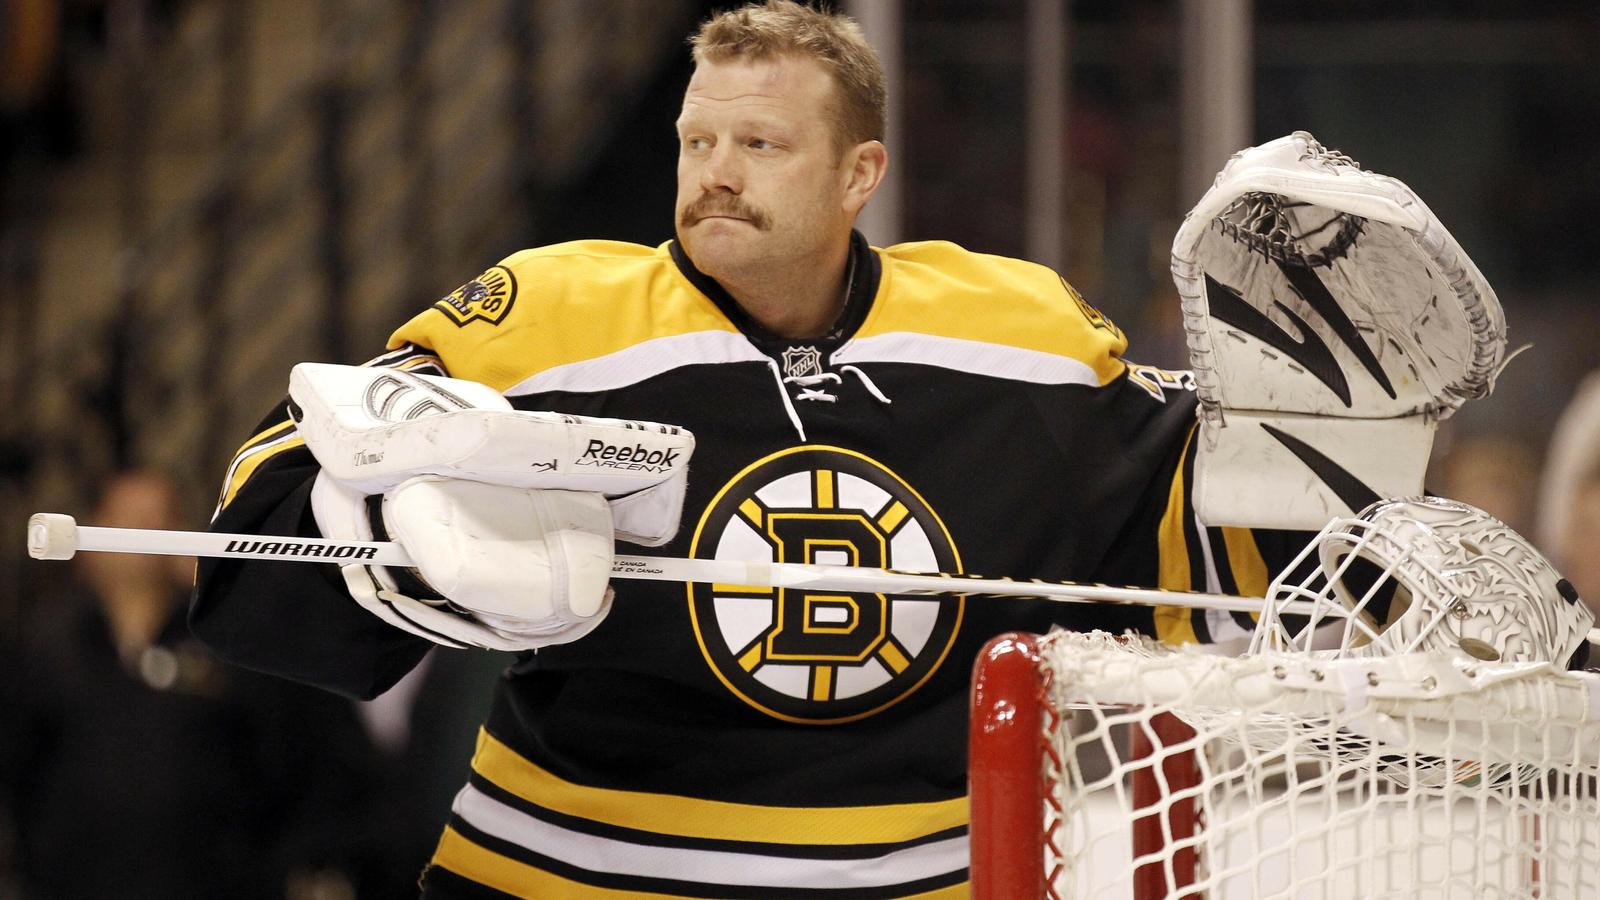 After suffering severe brain injuries, Tim Thomas breaks years-long silence and returns to hockey 